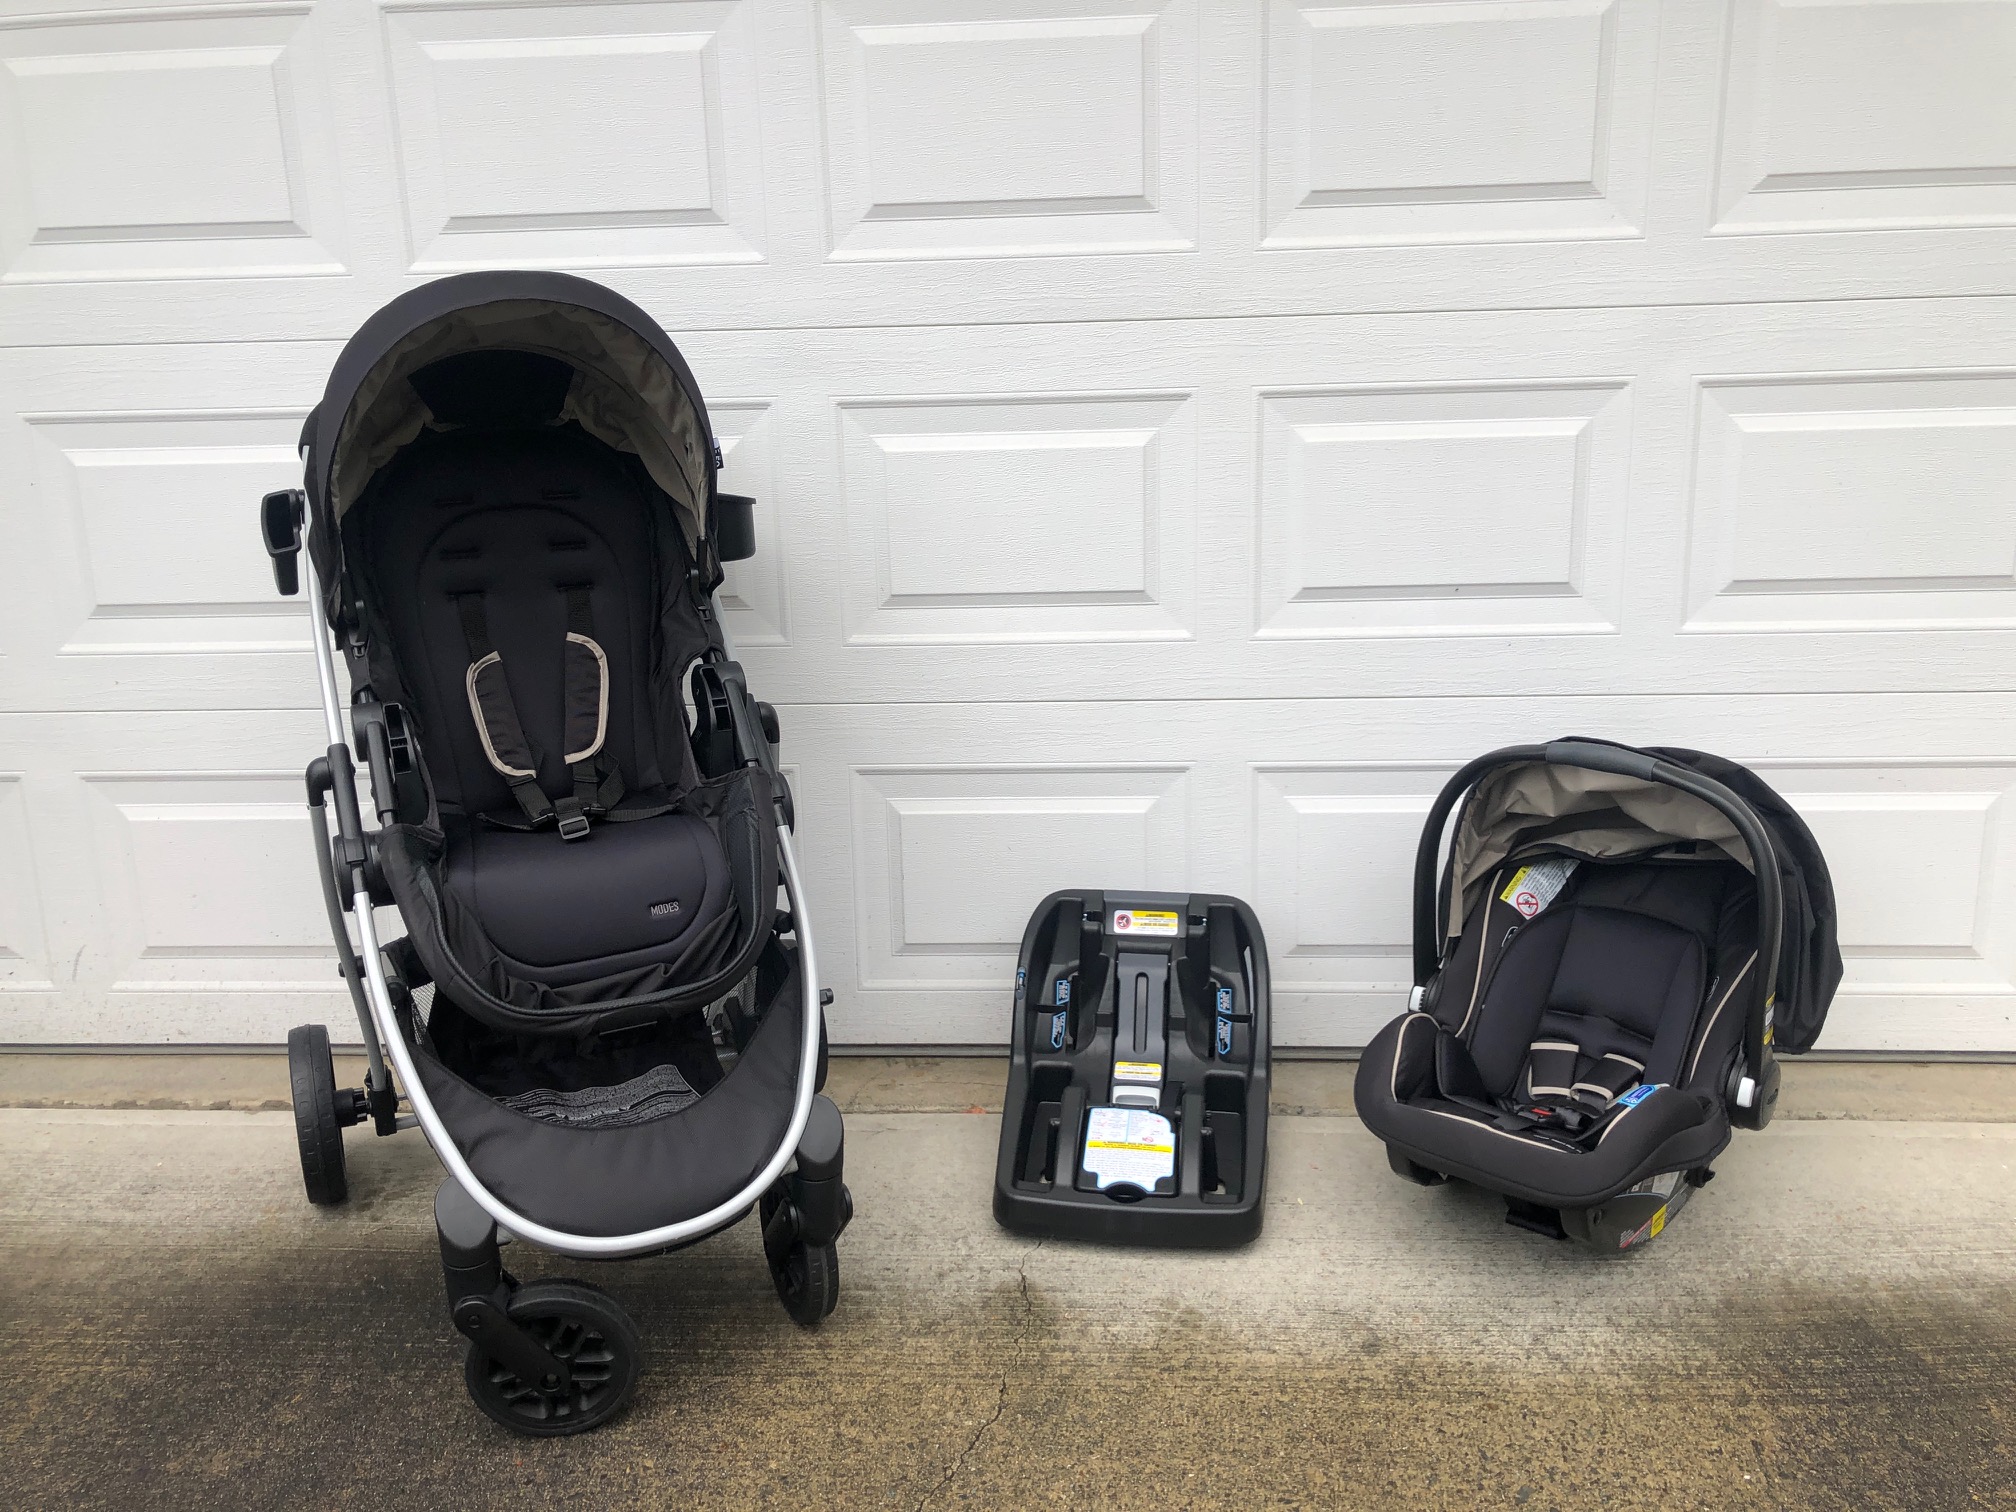 Graco Modes Pramette Travel System Featured Image